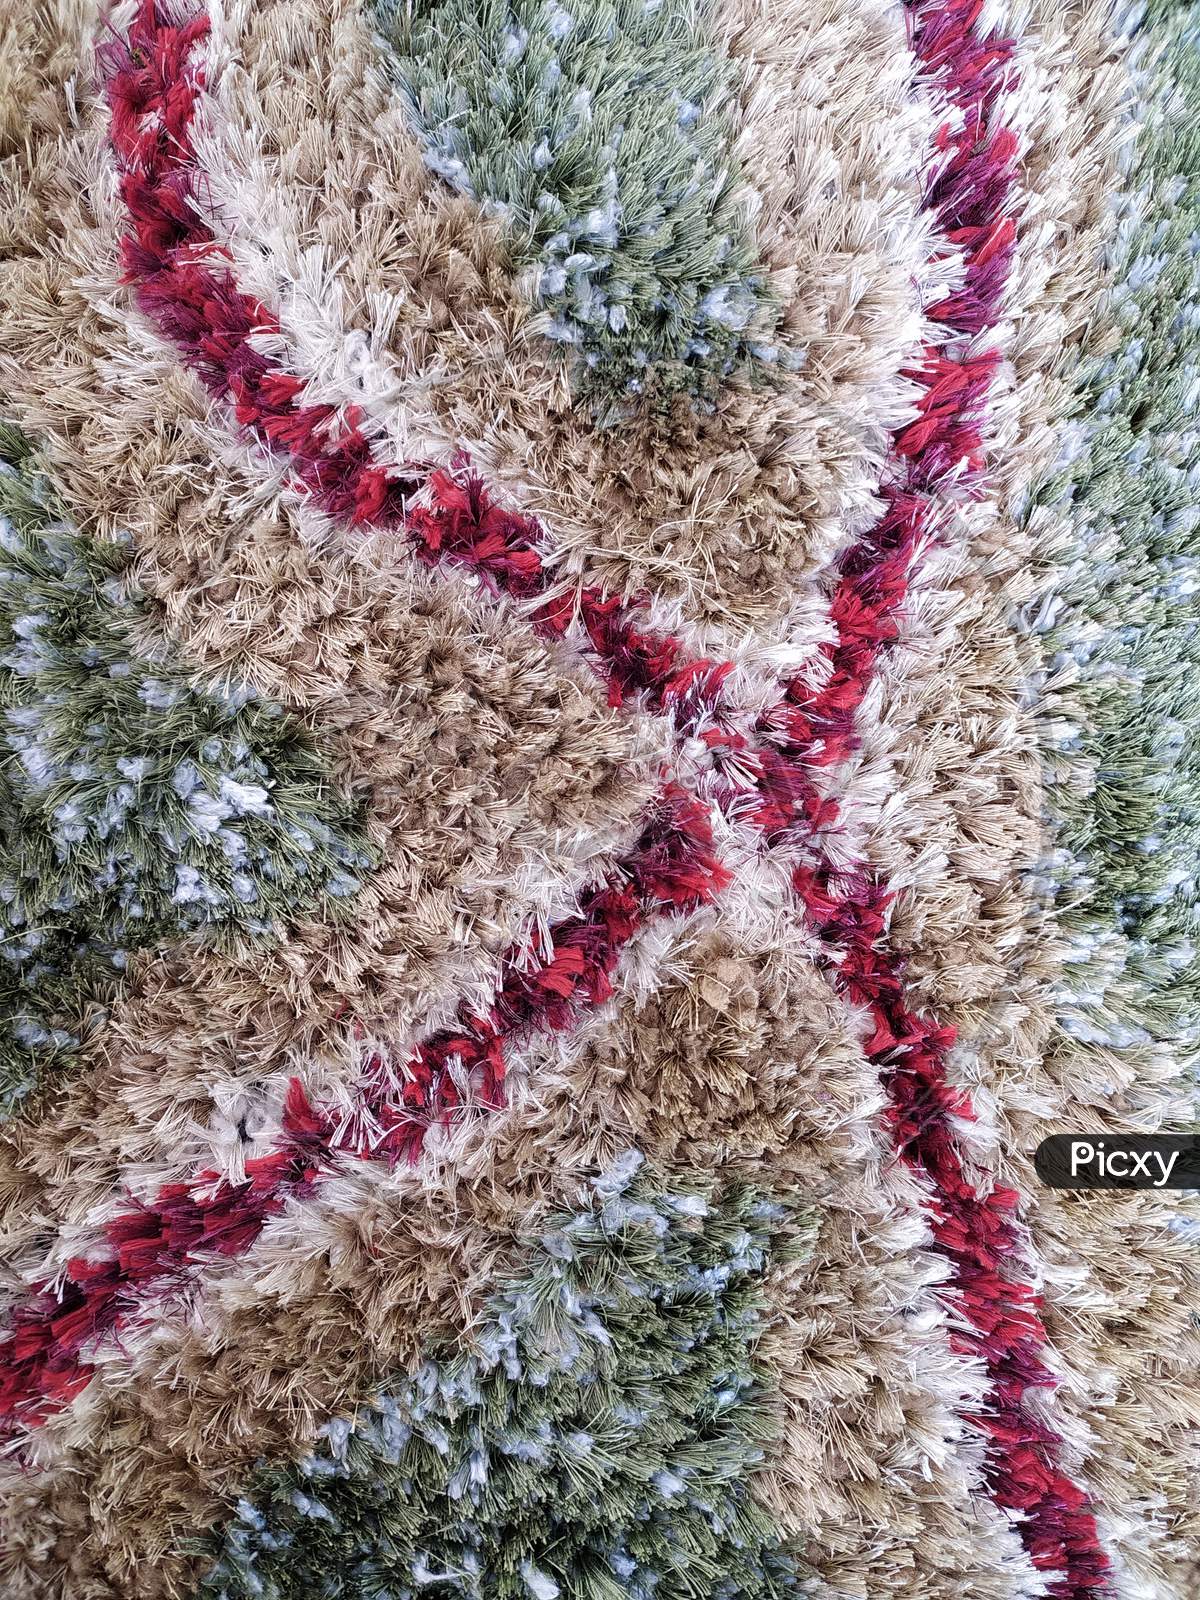 Texture And Patterns Of a Door Mat Forming a Background